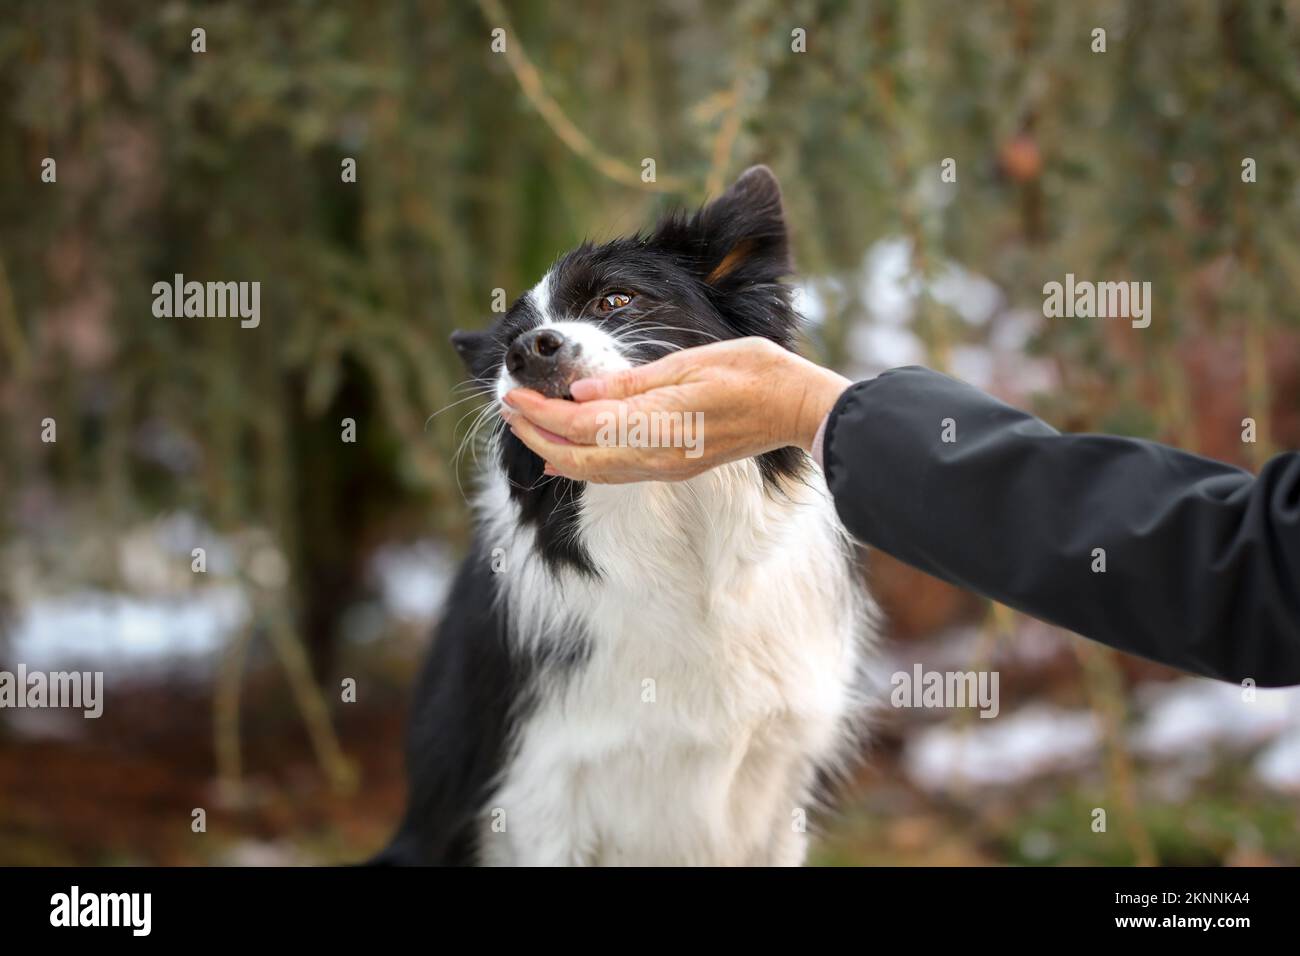 Border Collie Eats From Human Hand in the Garden. Cute Black and White Dog Gets the Treat from Female Hand Outside. Stock Photo